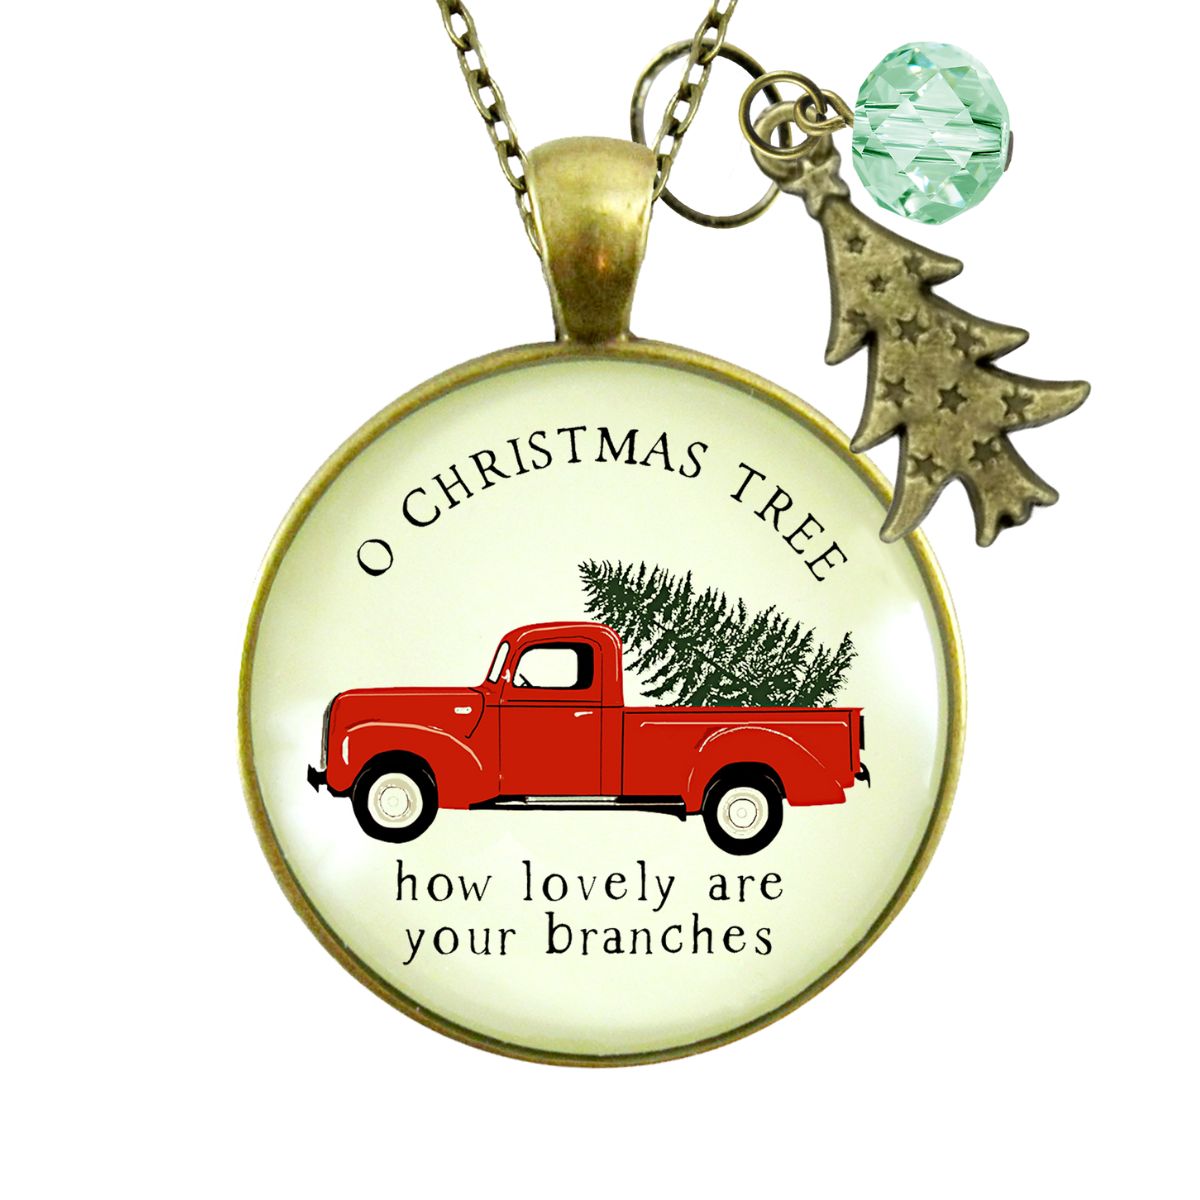 Red Truck Christmas Necklace Vintage Holiday Tree Charm Jewelry Gift  Necklace - Gutsy Goodness Handmade Jewelry